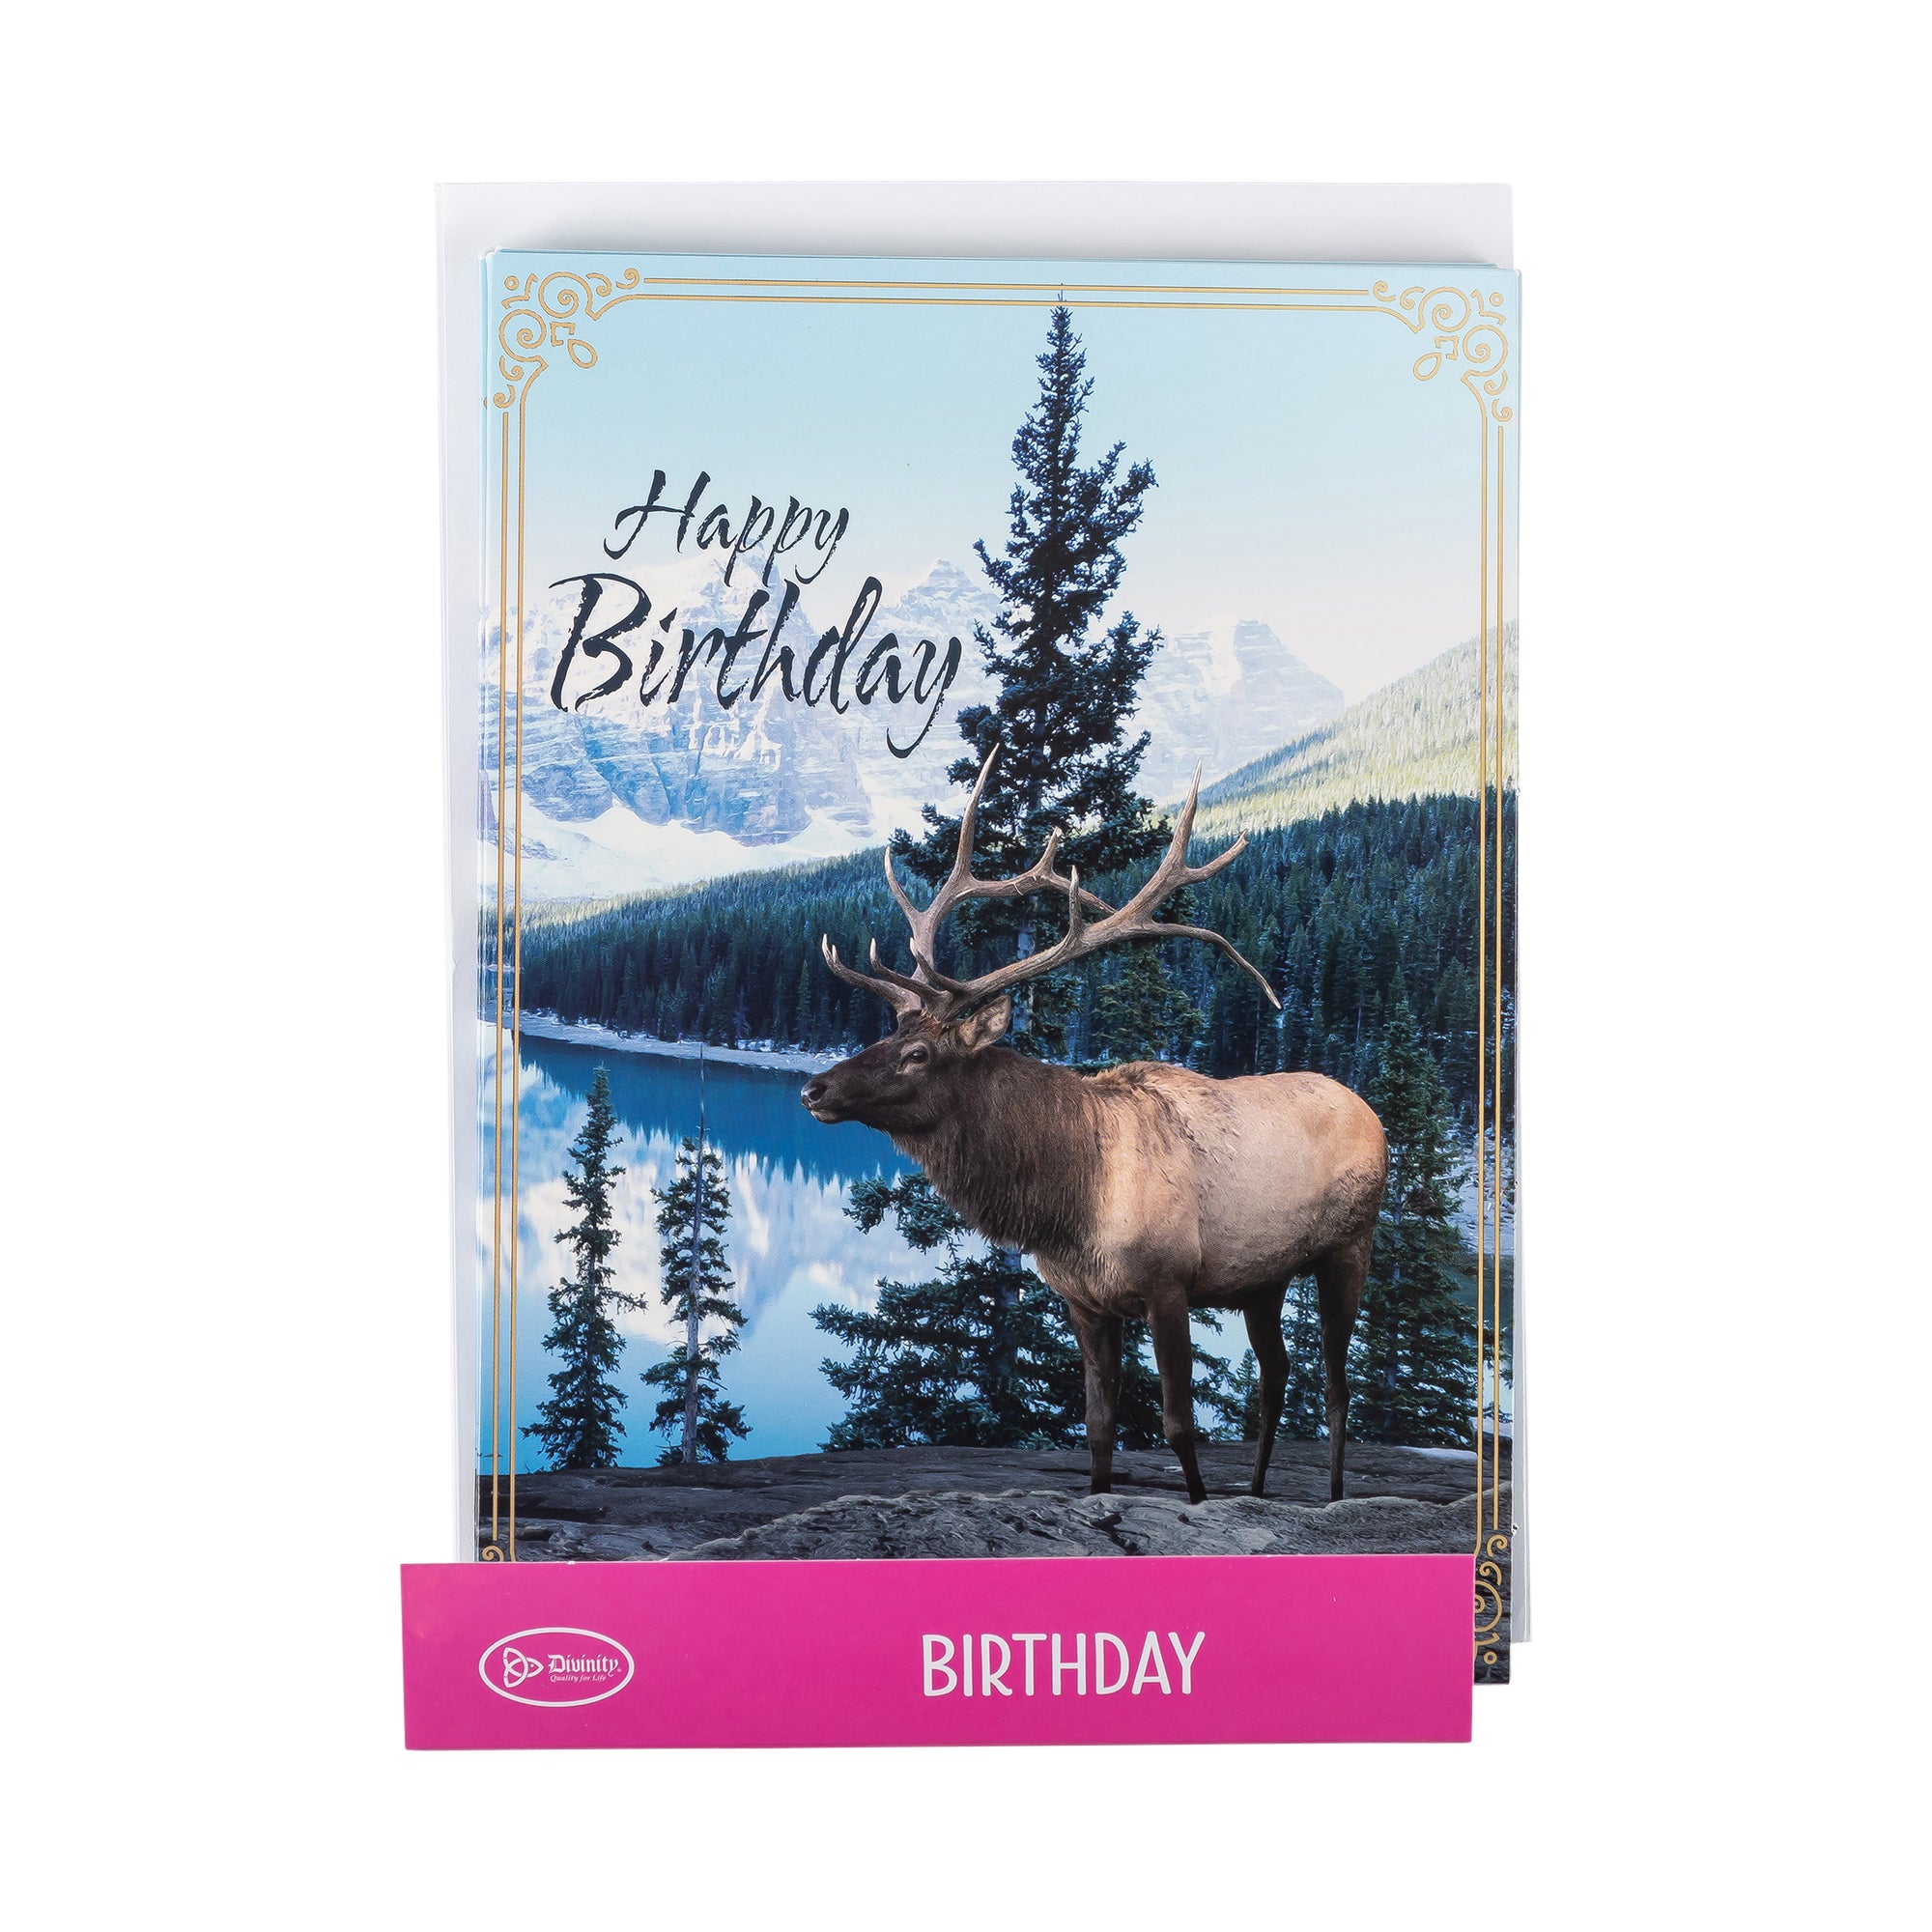 Single Cards: Birthday, Elk, Have a Blessed Birthday (Set of 6)